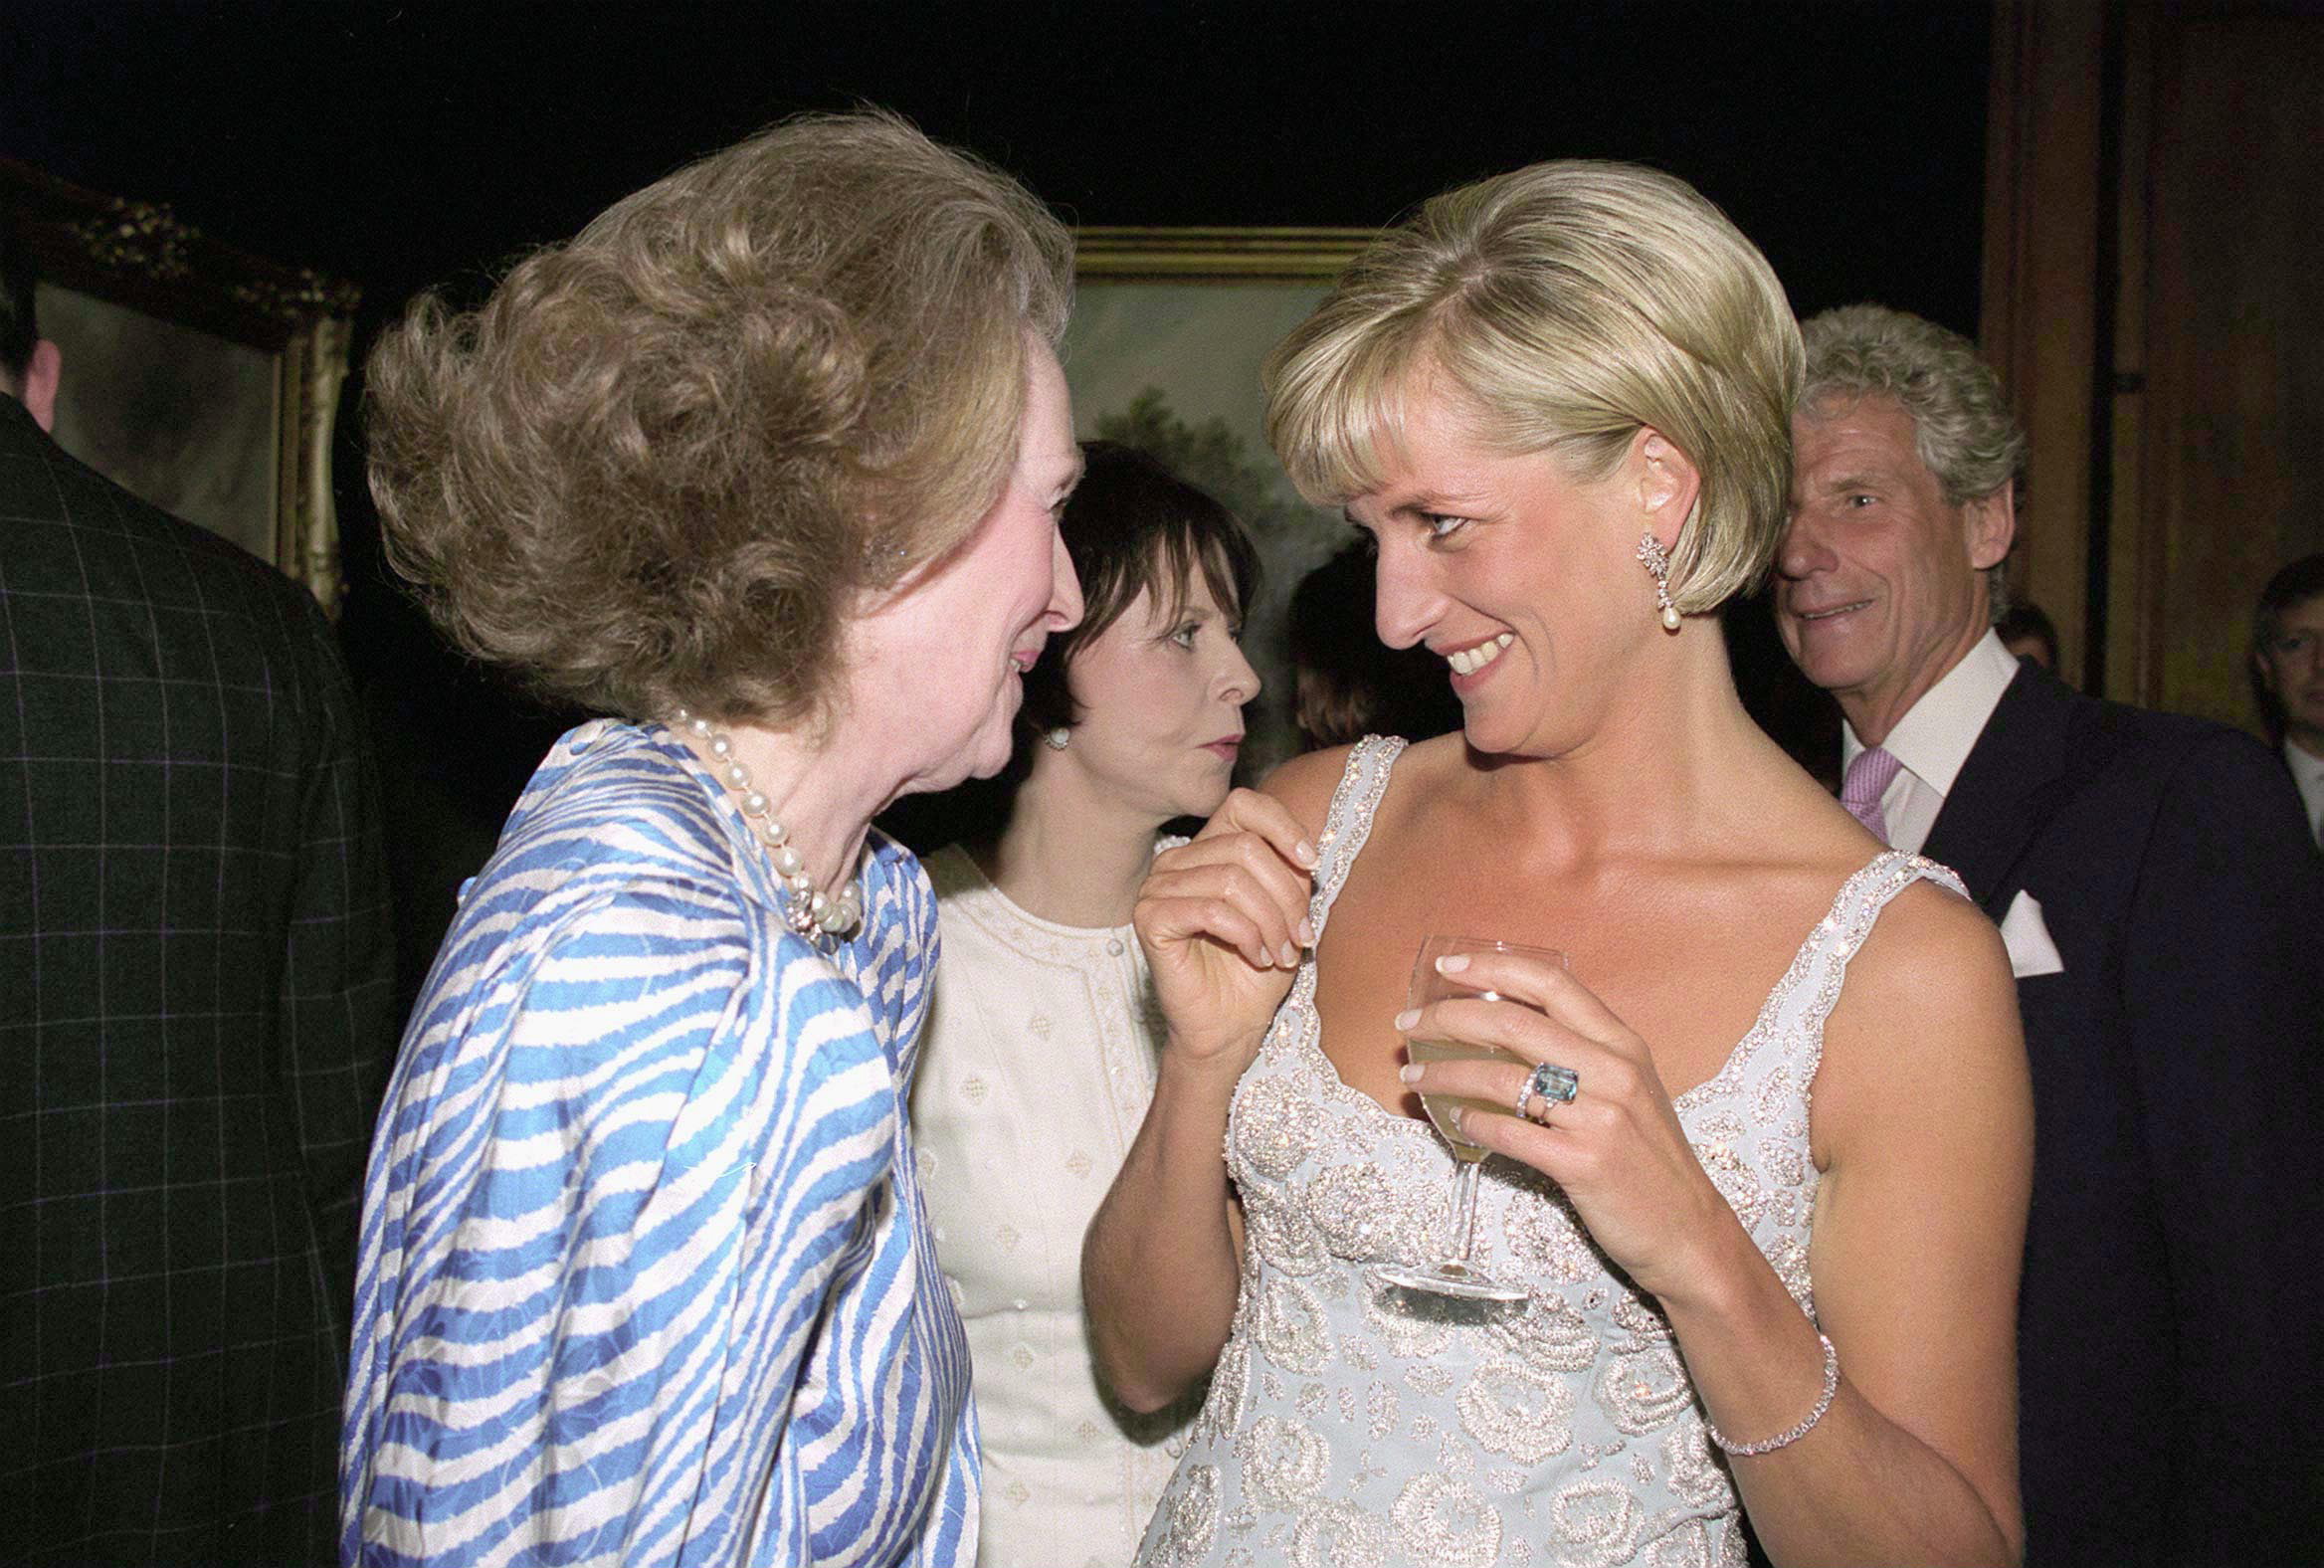 Diana, Princess Of Wales at A Private Viewing And Reception At Christies In Aid Of The Aids Crisis Trust And The Royal Marsden Hospital Cancer Fund. With her Stepmother Raine, Comtesse De Chambrun.  (Photo by Tim Graham/Getty Images) (Tim Graham&mdash;Tim Graham/Getty Images)